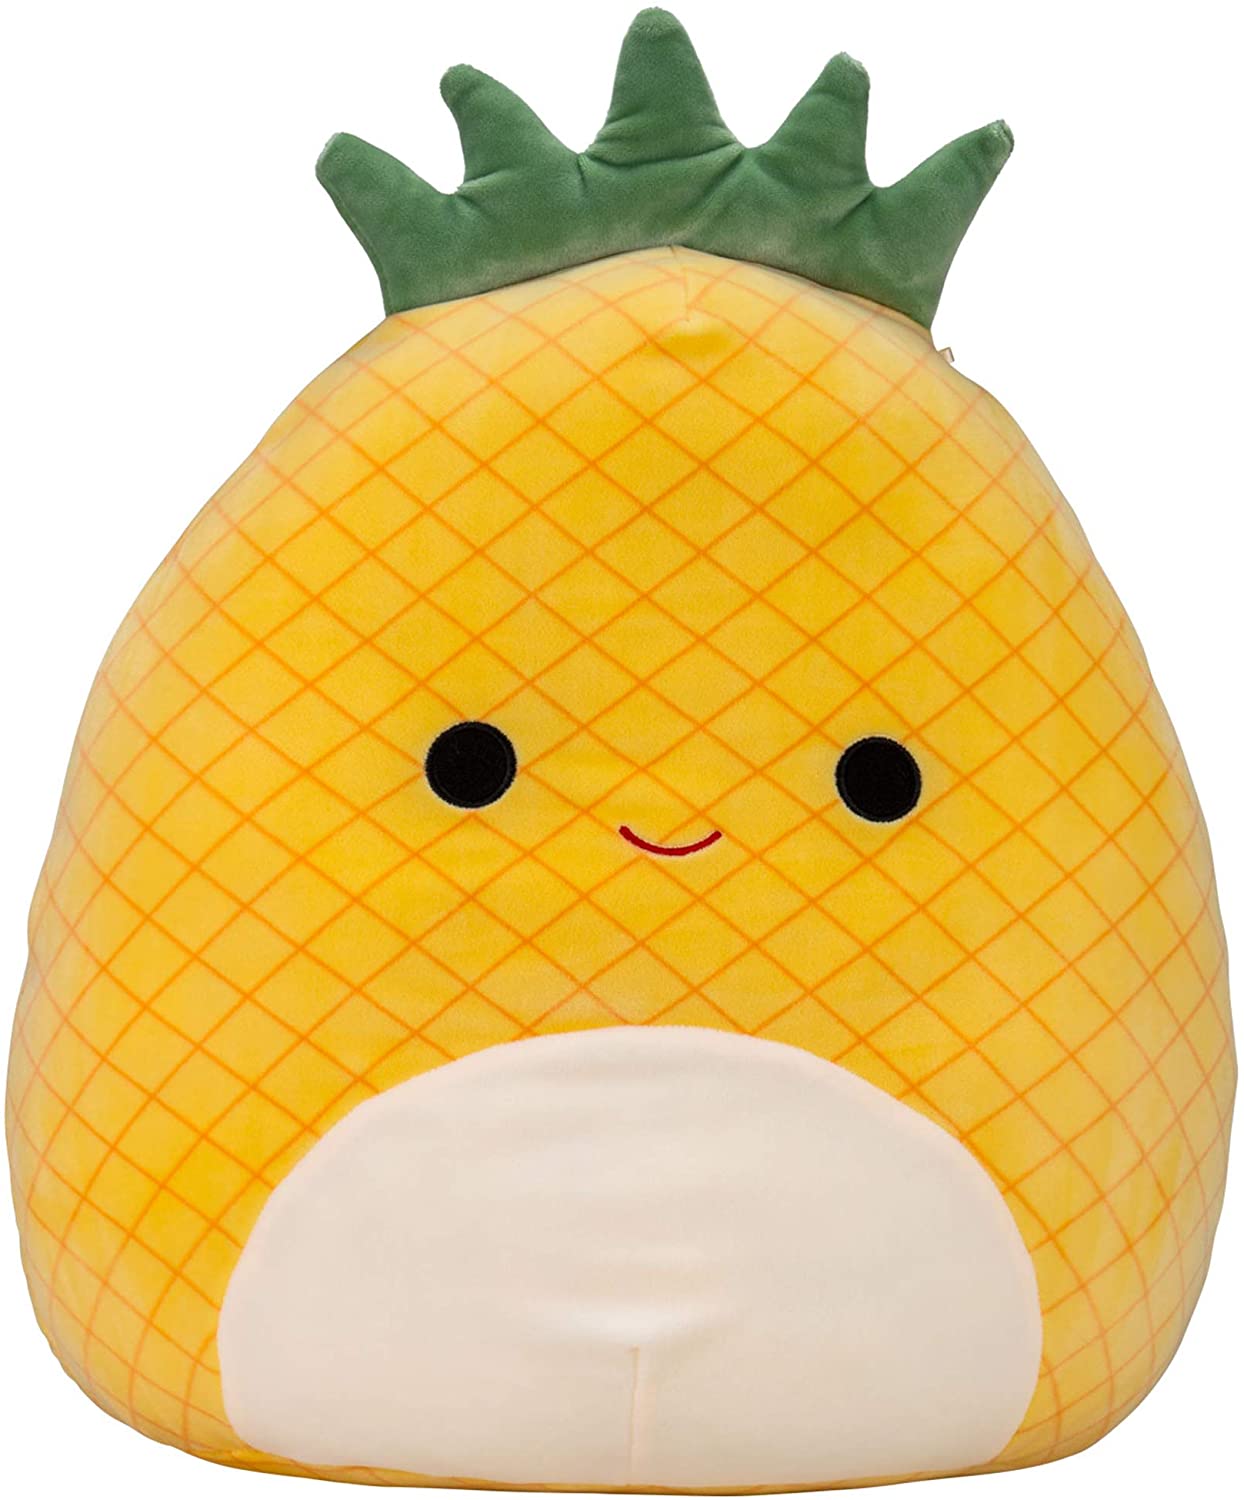 12" Squishmallows Official Kellytoy Plush Toy (Maui The Pineapple) $14.88 + Free Shipping w/ Prime or on orders over $25+